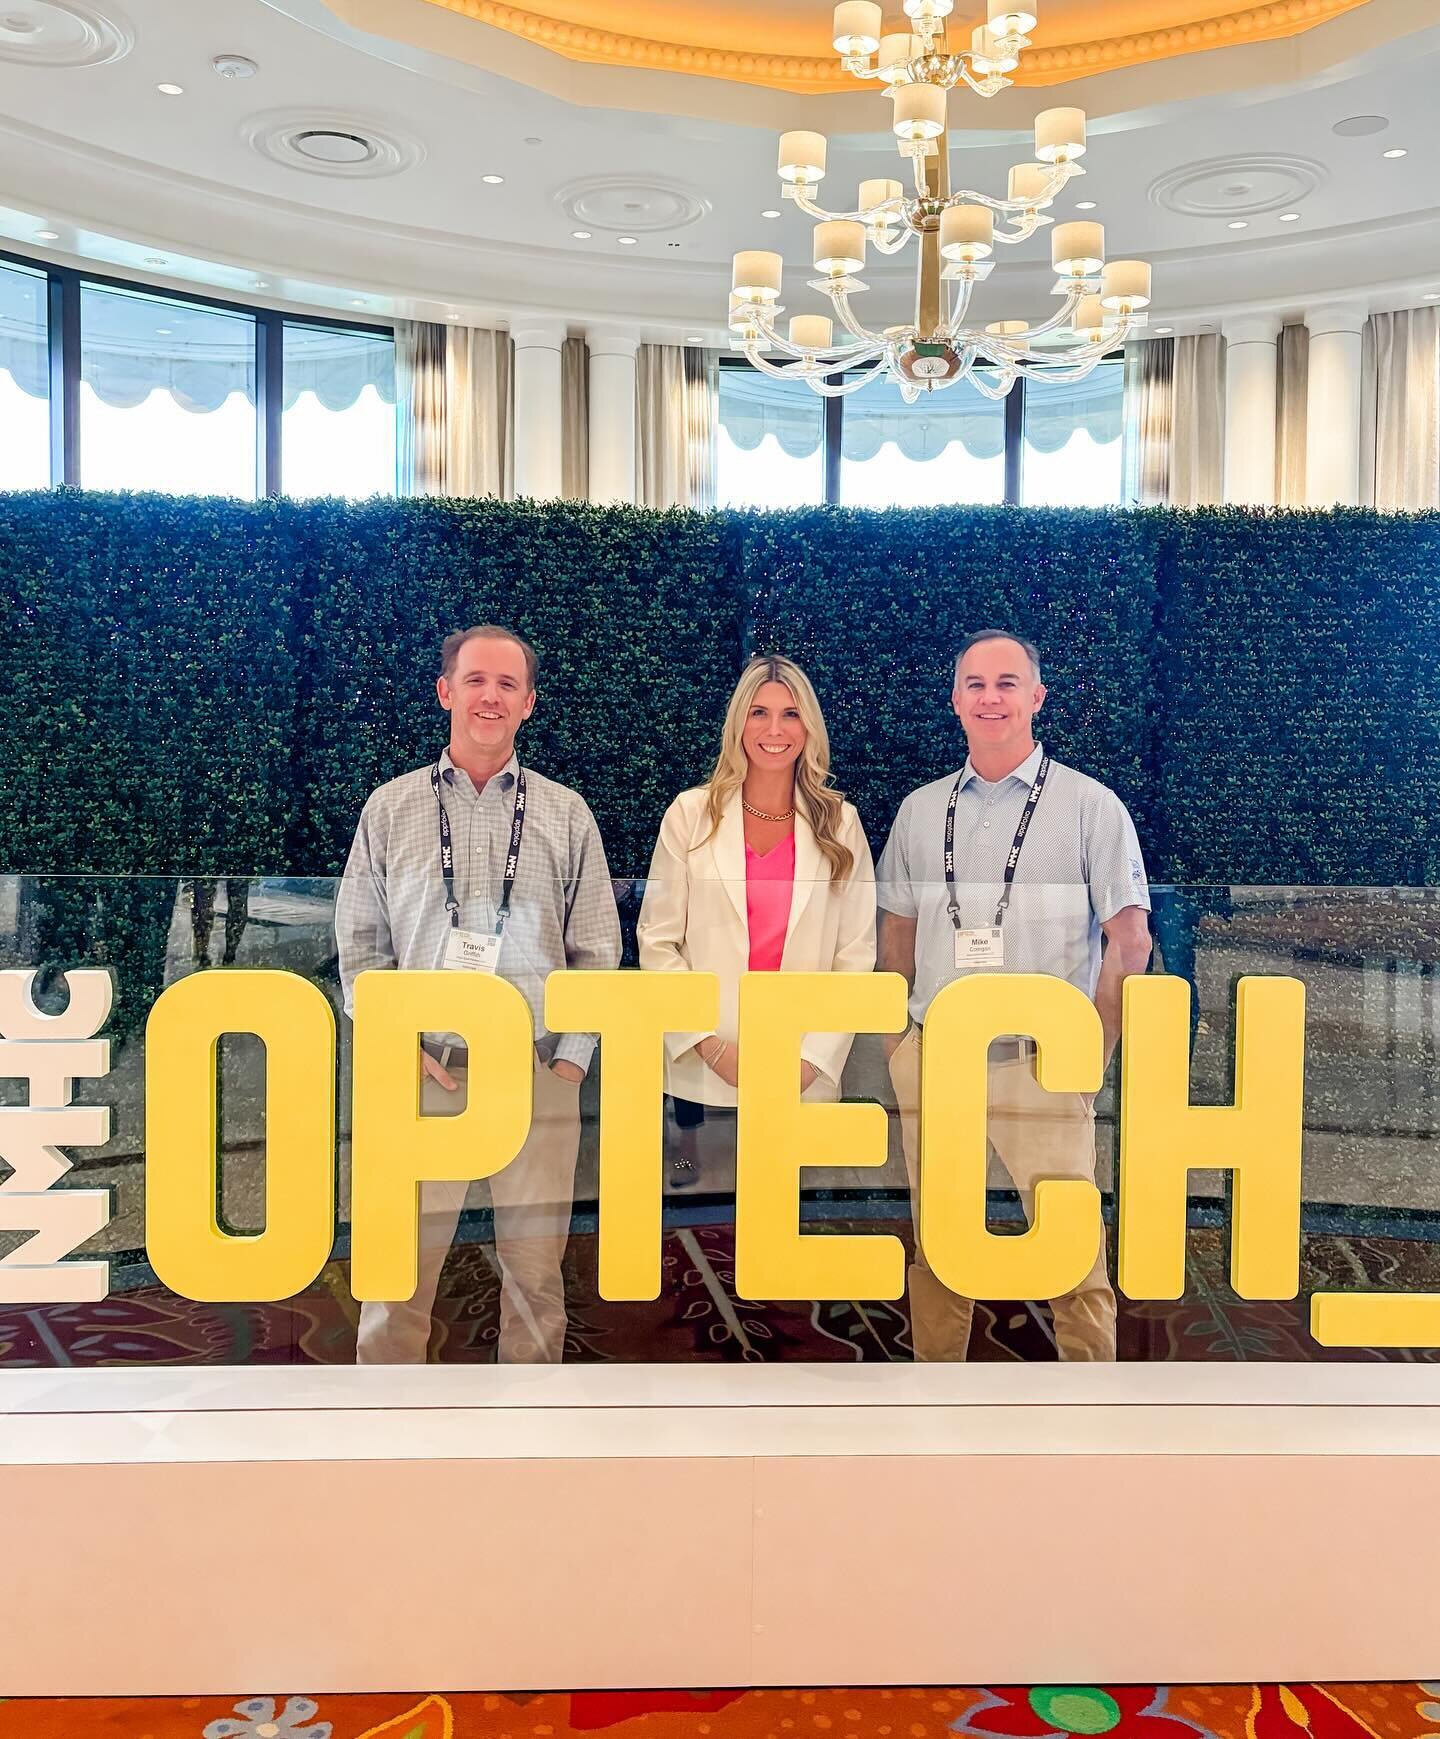 Travis, Kristin &amp; Mike had a jam packed week in Vegas for NMHC's annual OpTech conference! ✨ 💻 

They had the opportunity to gain insights from top innovators and establish connections with industry partners pivotal to propelling us into our nex